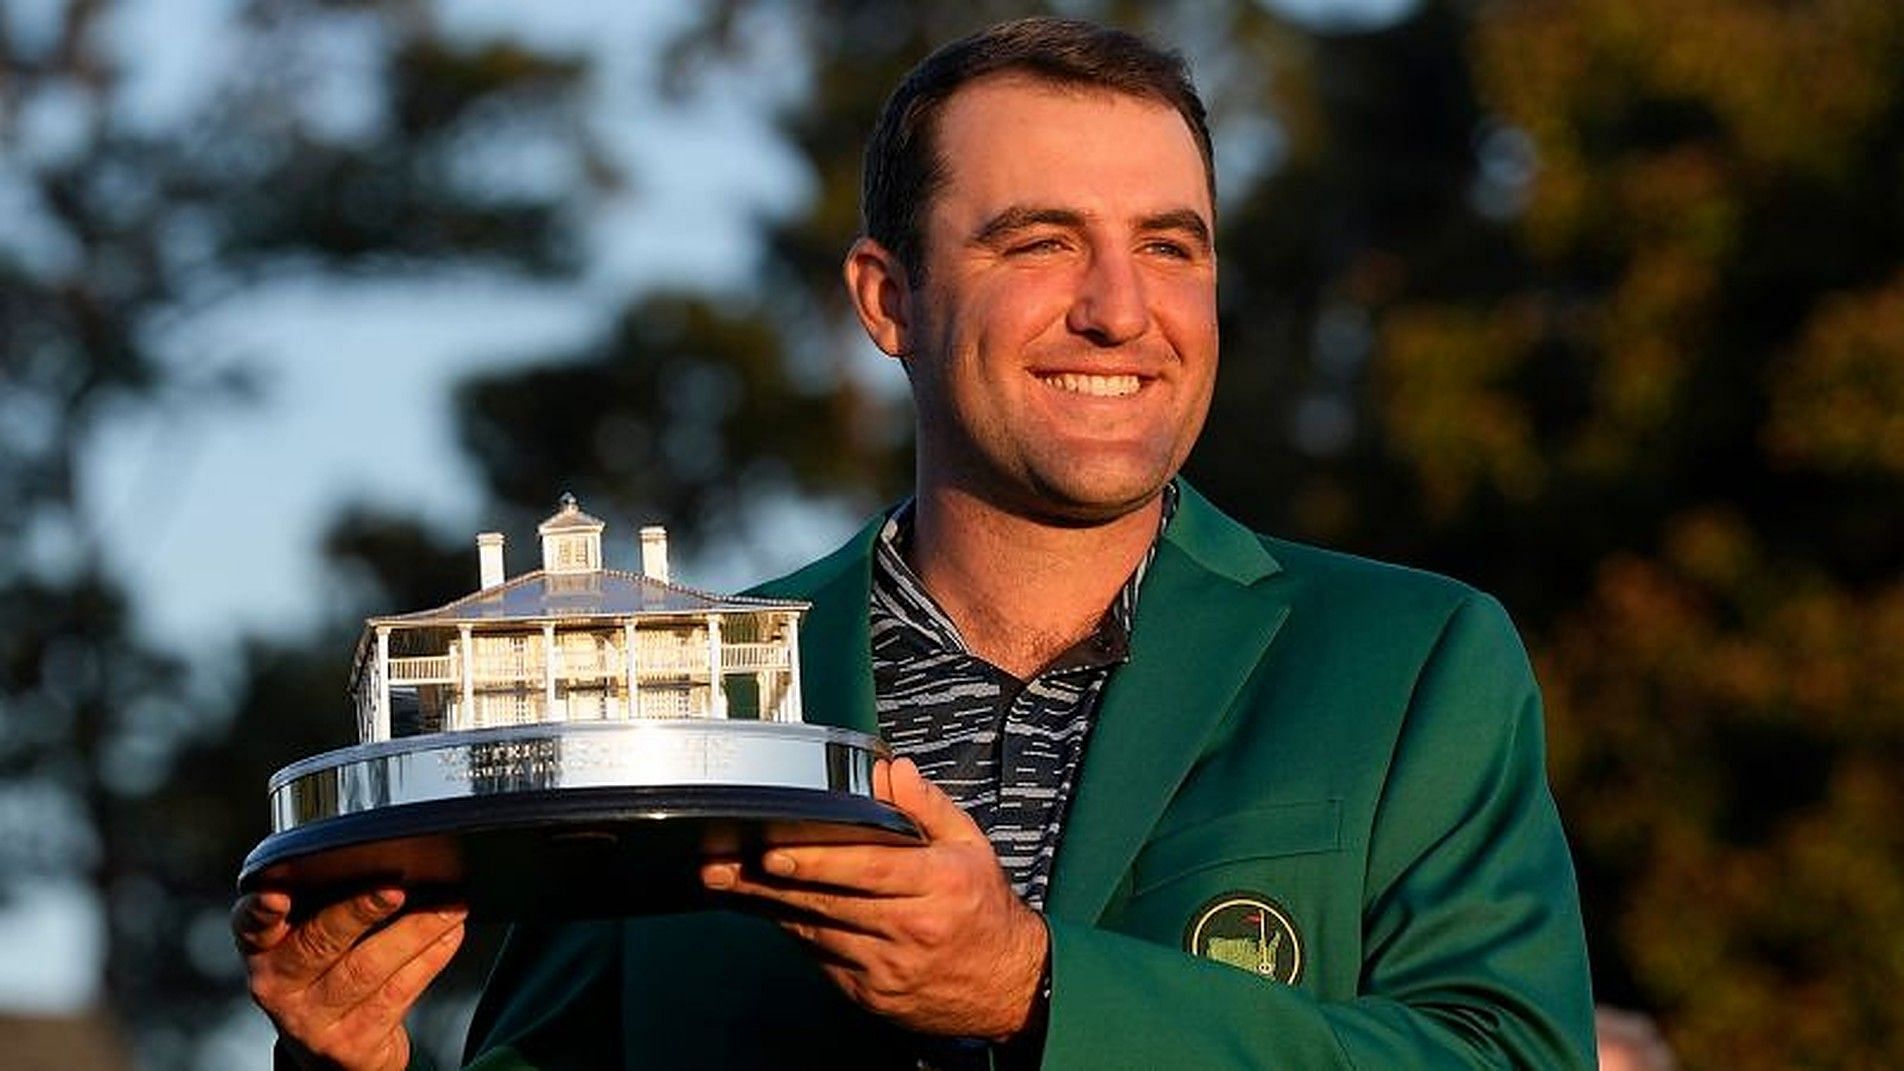 11 golfers who can win The Masters in 2023, ranked 